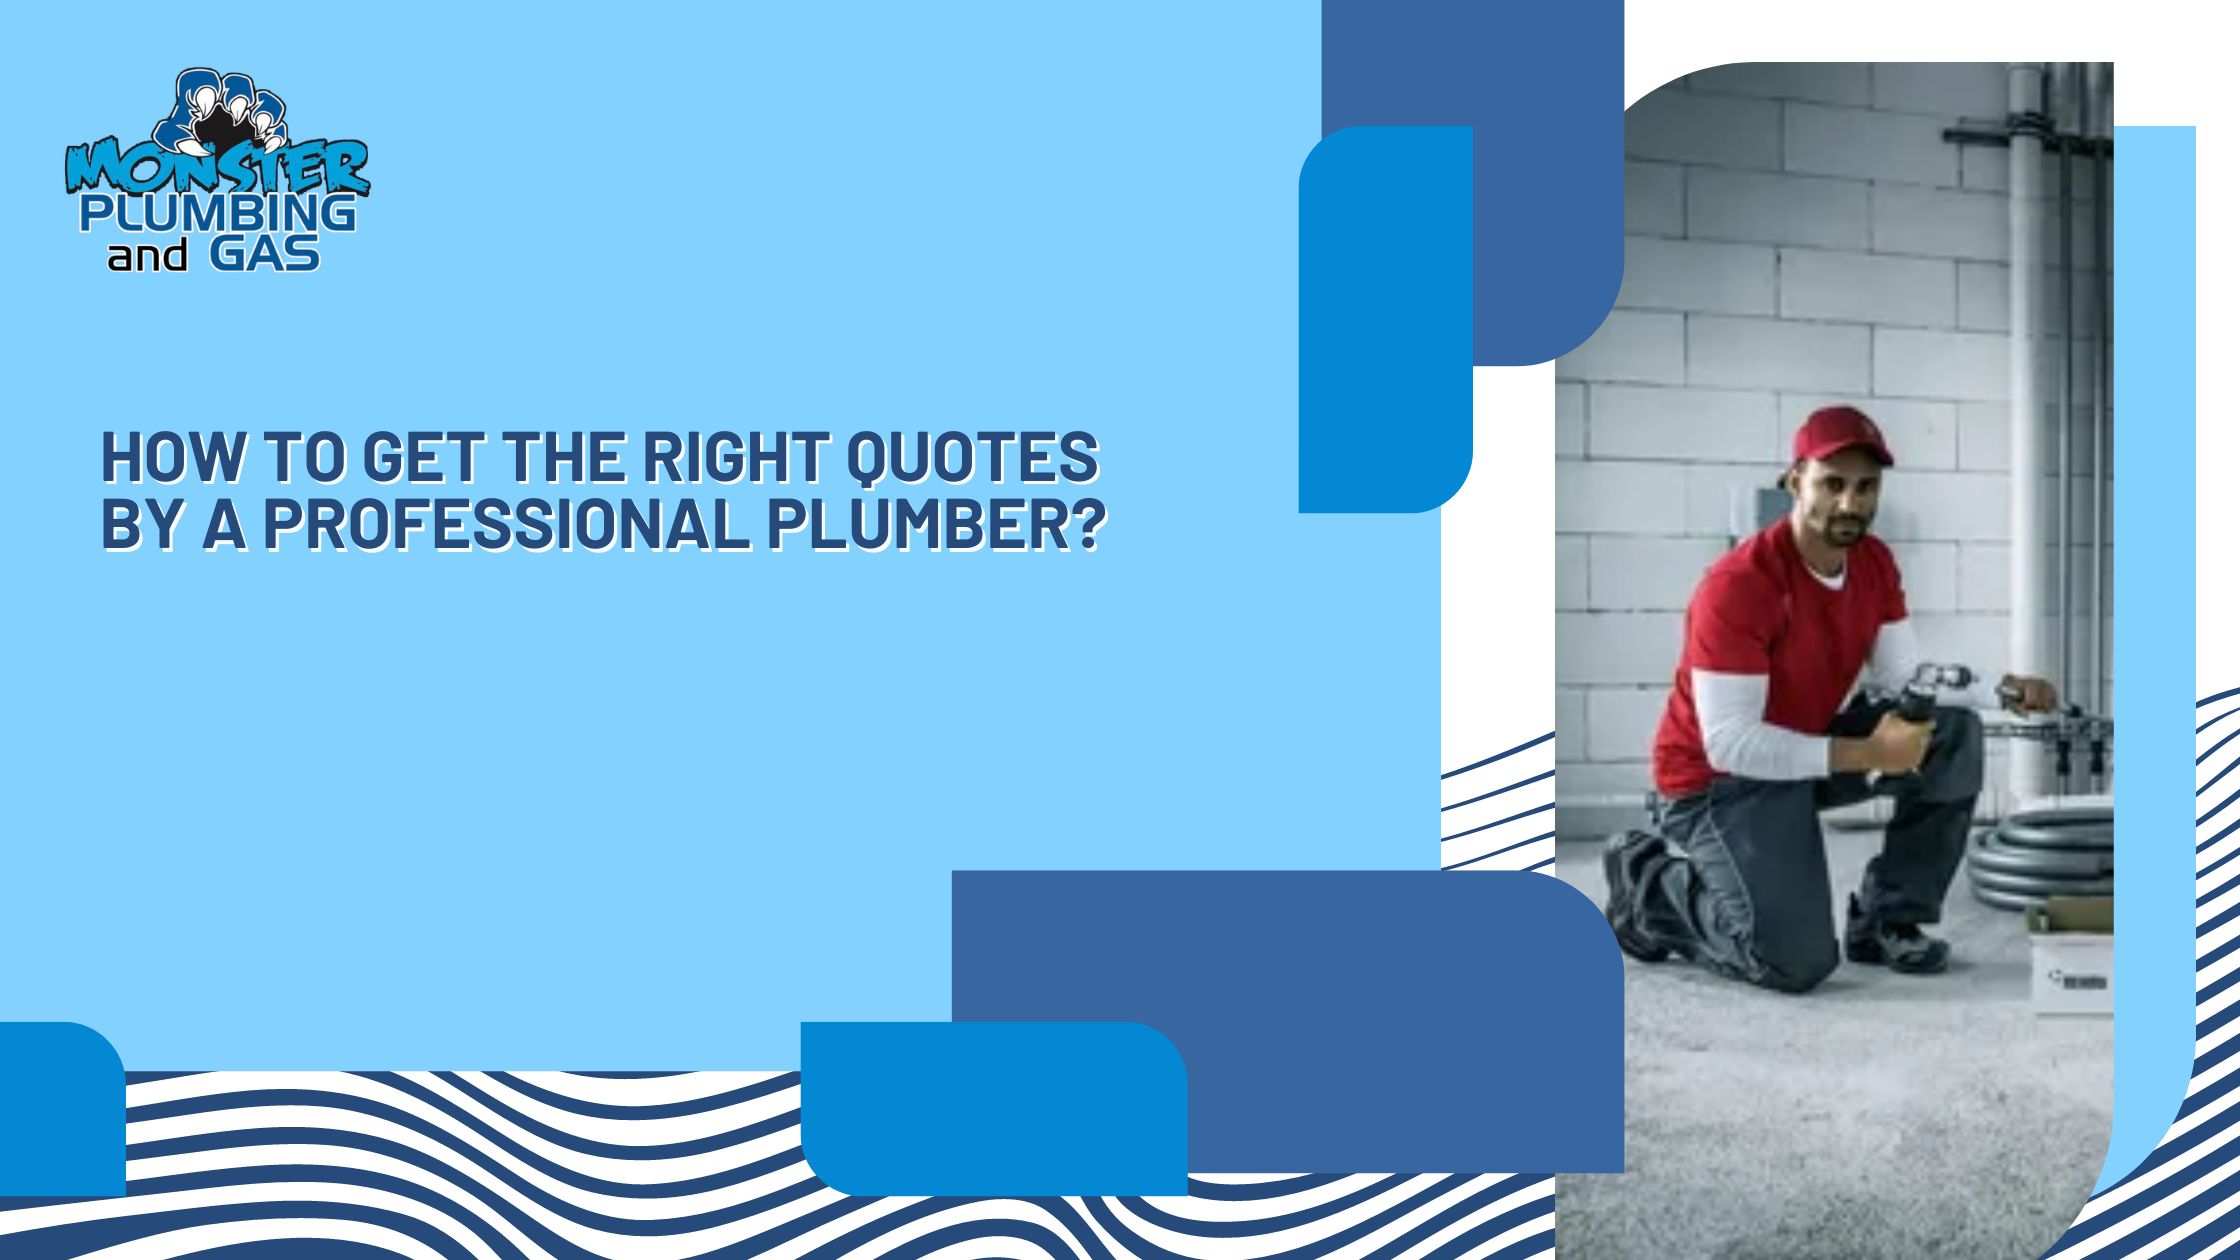 How To Get The Right Quotes By A Professional Plumber